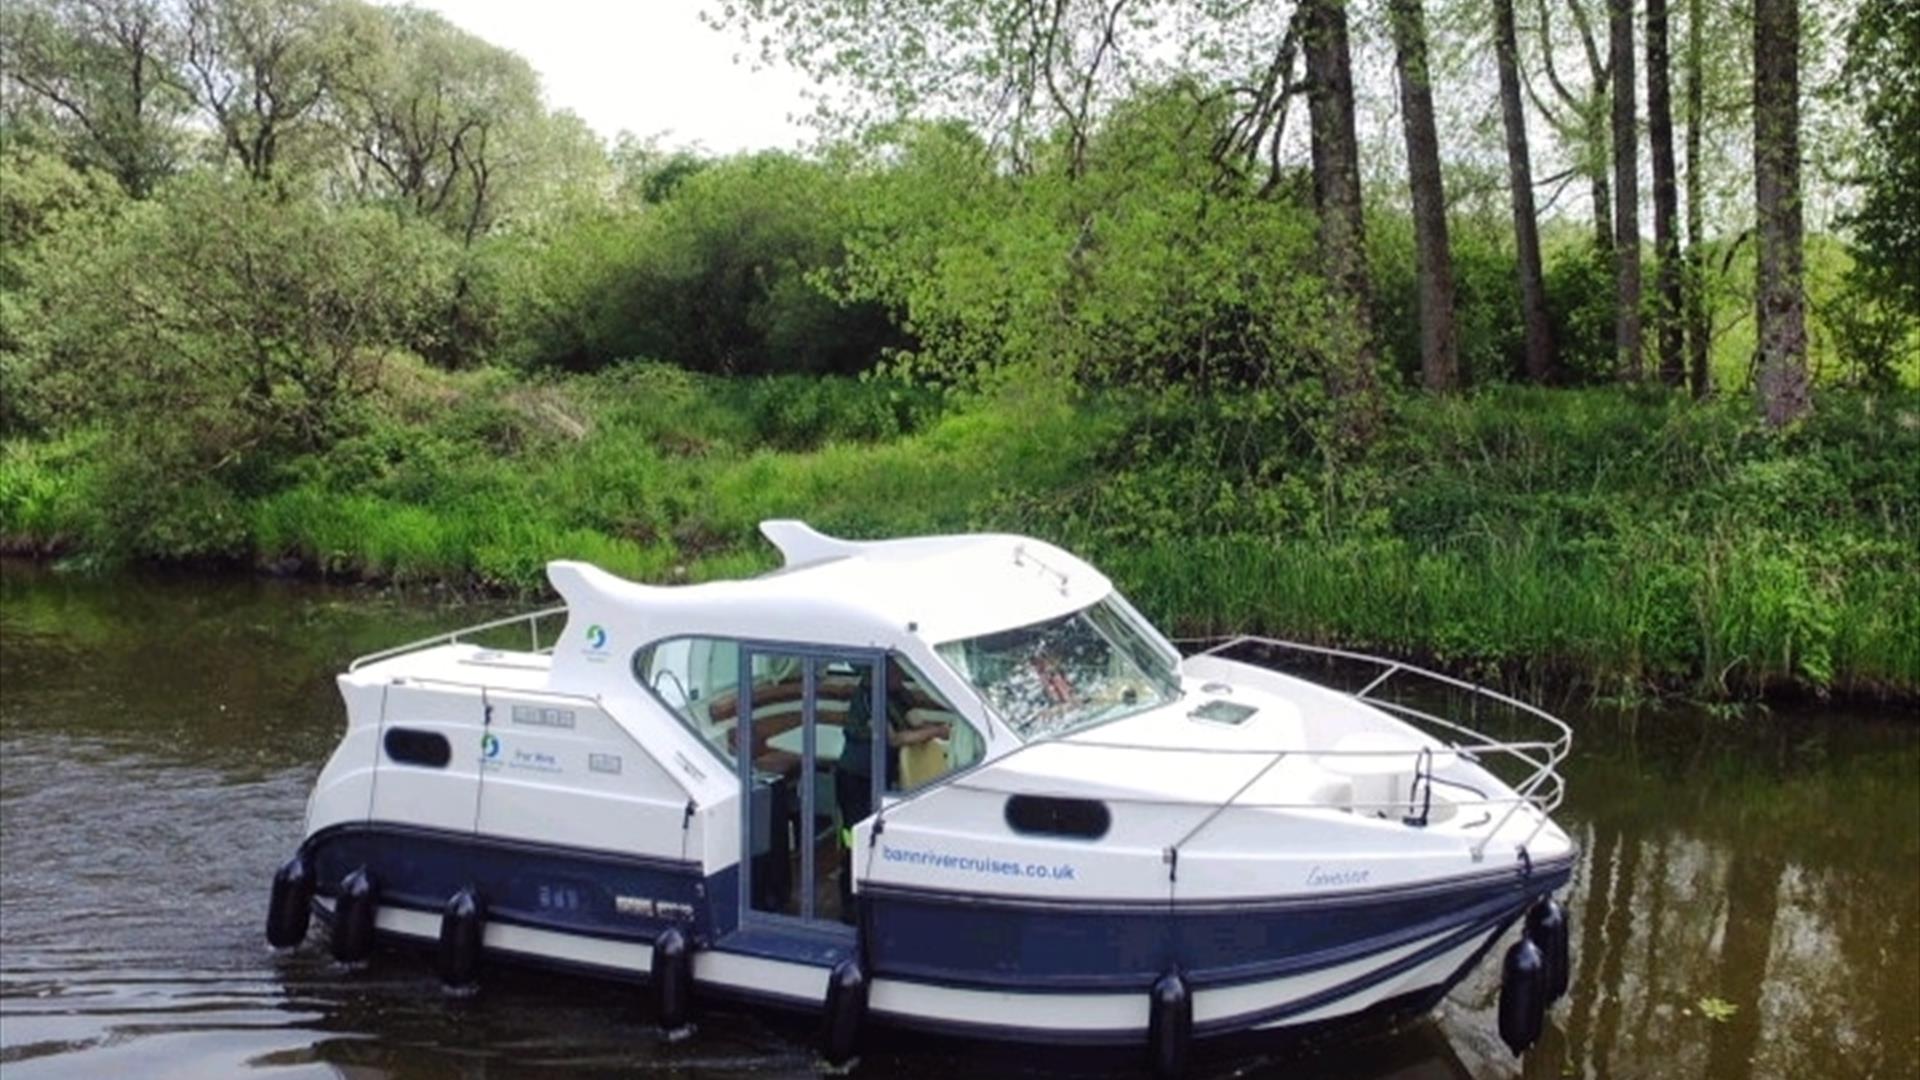 Bann River Cruises
Get outdoors and explore the Bann River.
Holiday at your own pace onboard one of our licensed, well equipped modern vessels.
Full t